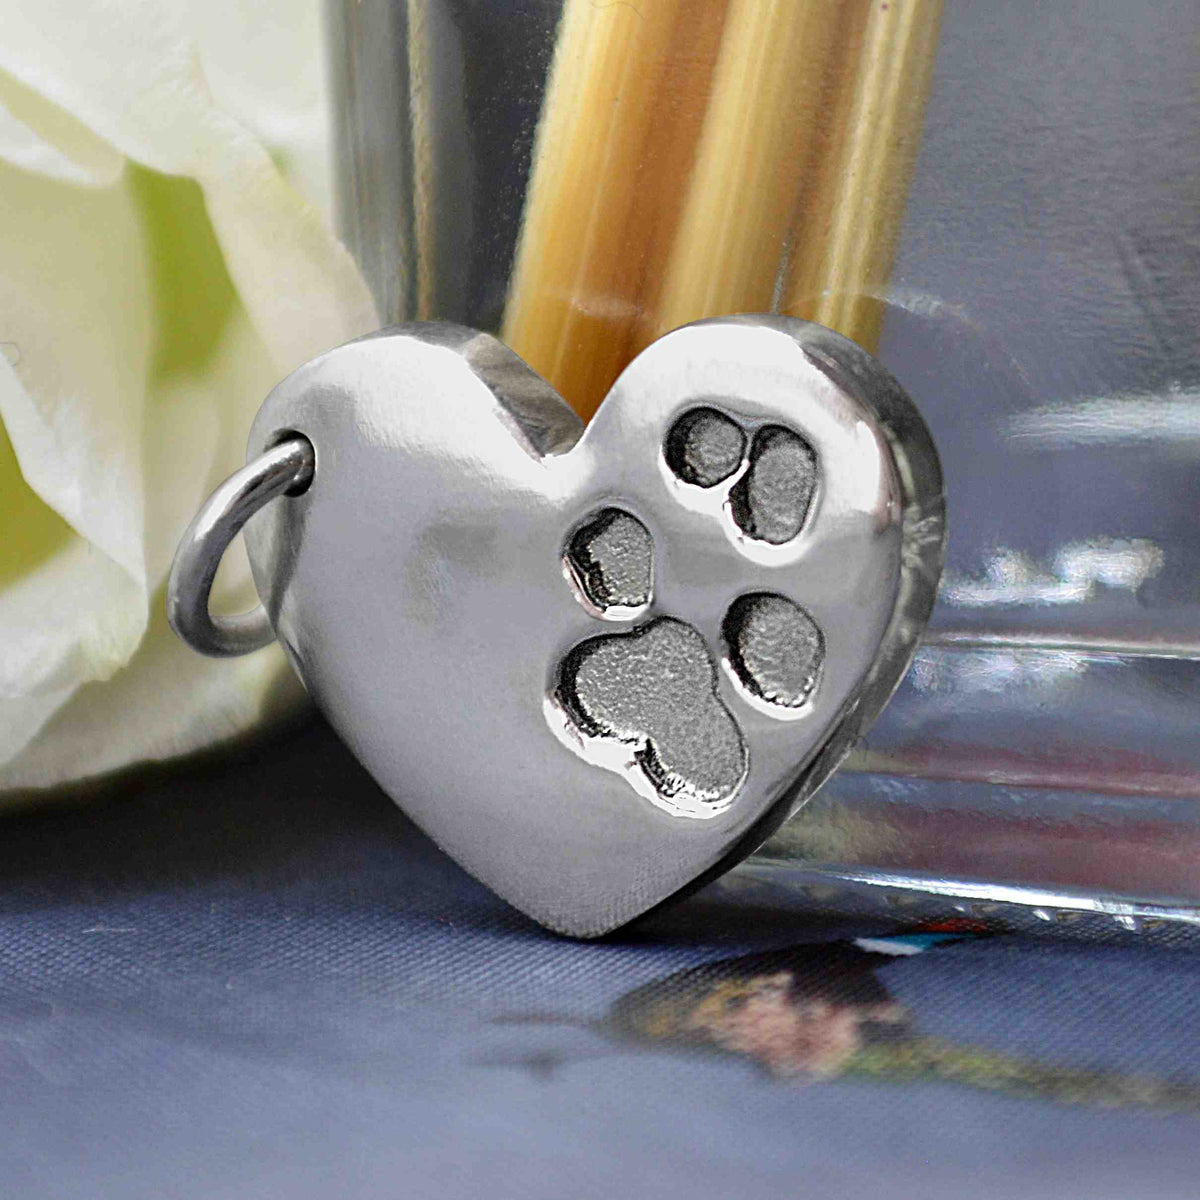 HEART NECKLACE FOR DOGS CATS OTHER ANIMALS Fingerprint Charms and Necklaces sophia